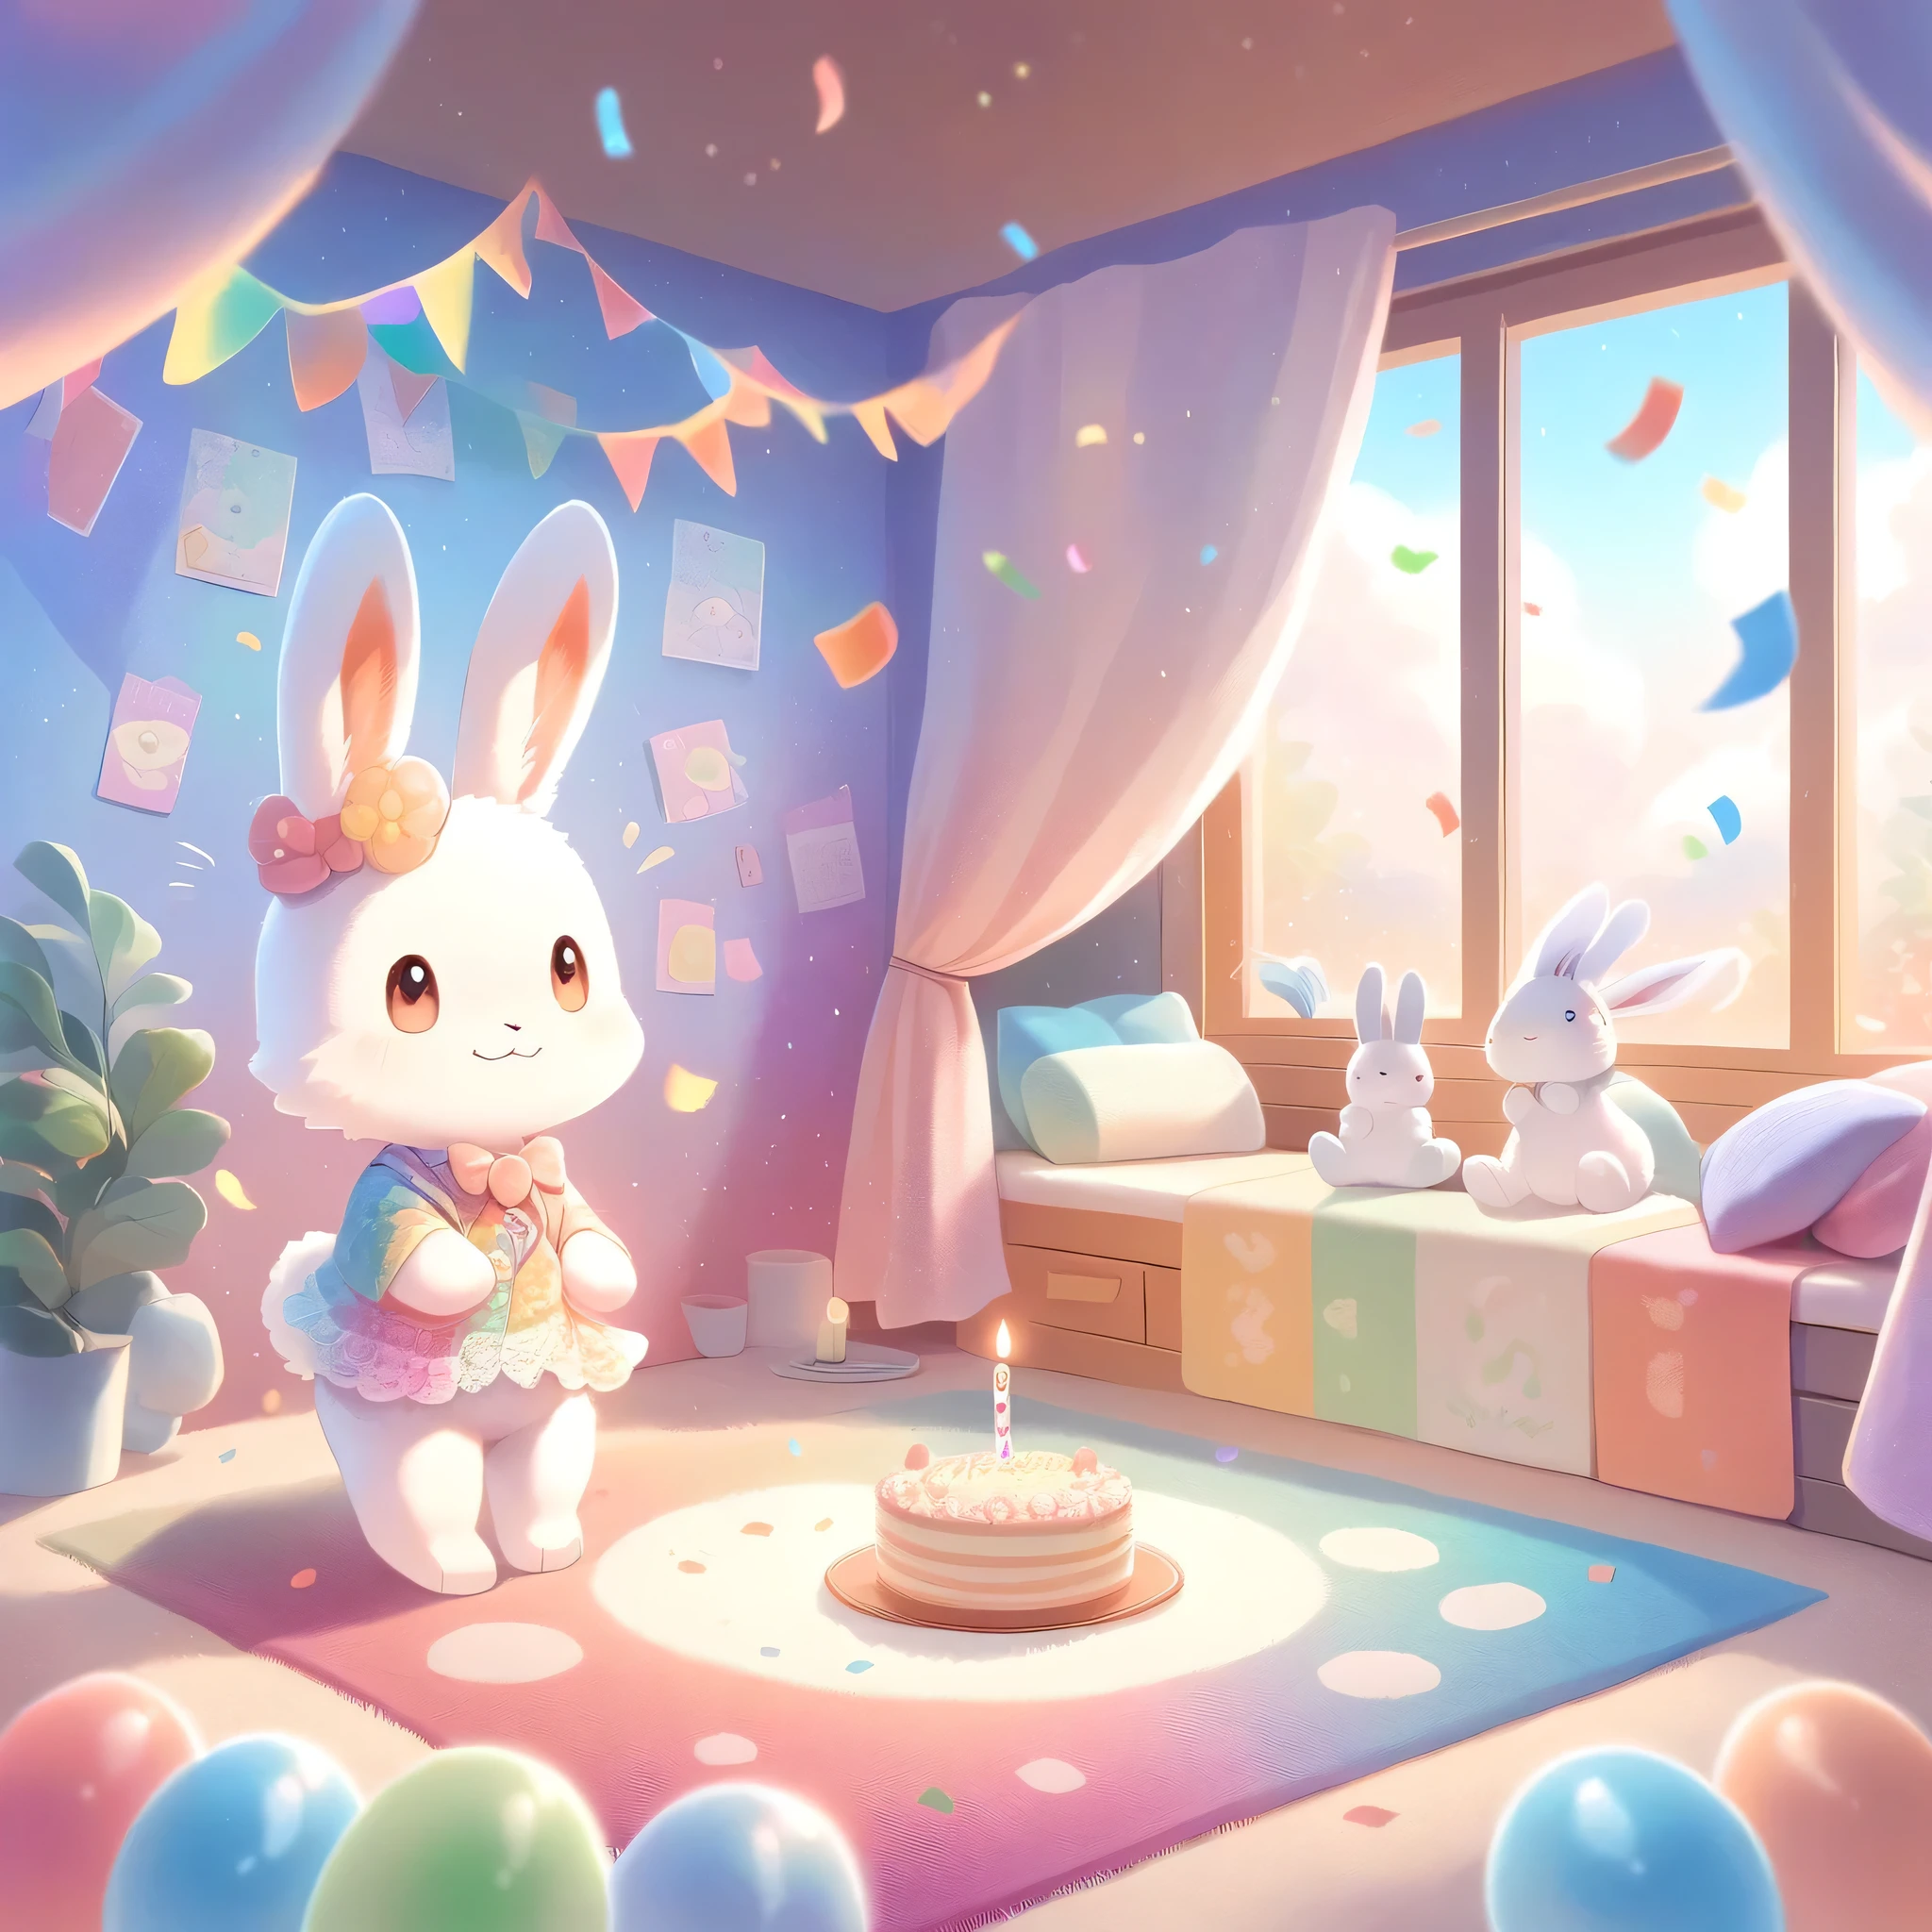 cuteAn illustration,Rabbit Kindergarten,Rabbit&#39;s Parent and Child:animal:cute:Get closer:Comfortable and warm:looks happy,An illustration,pop,colorful,color,,Lamp light,Rabbit&#39;s Parent and Child:Dreaming happy dreams,The room is warm and full of happiness.,,colorful,Fancy,Fantasy,patchwork:quilt,Detailed explanation,fluffy,Randolph Caldecott Style,rabbit,Very cuteRabbit,fluffyrabbit,birthday,Birthday Cake,Sparkling,Magic Effects,Magic Light,Magical Effects,Dream world,Wall decoration,celebration,Confetti,